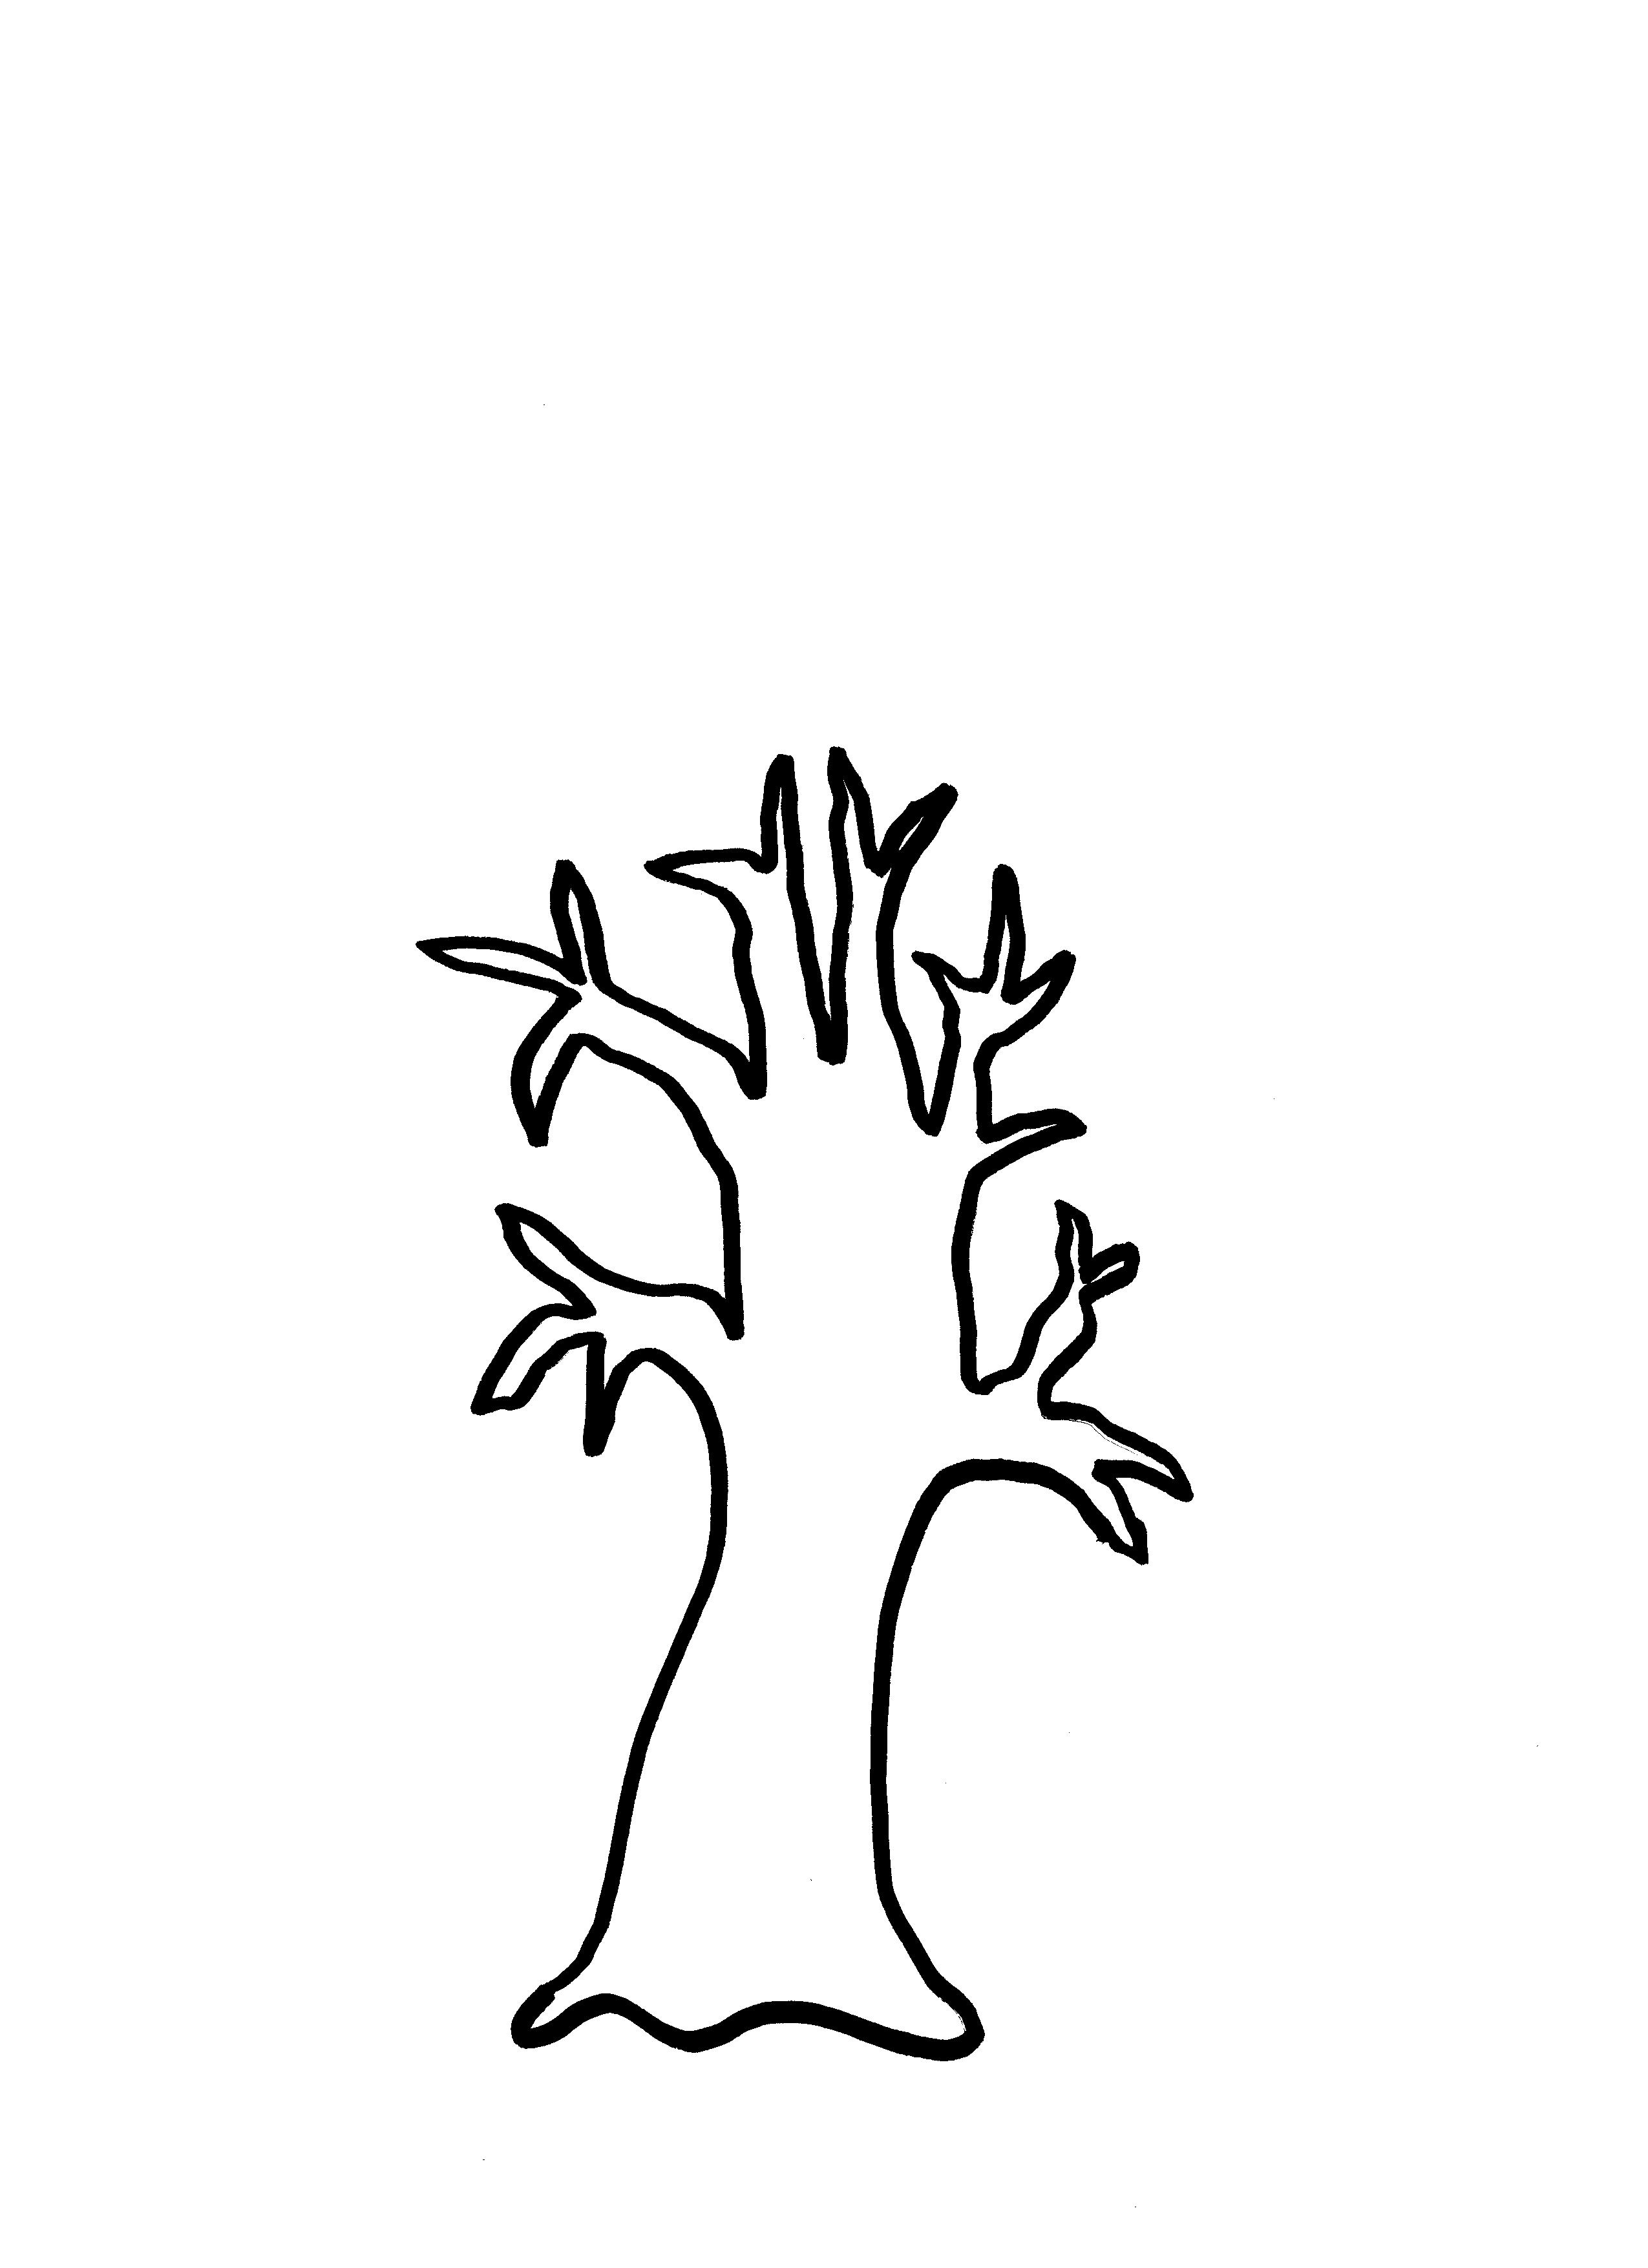 tree trunk clipart black and white - photo #17